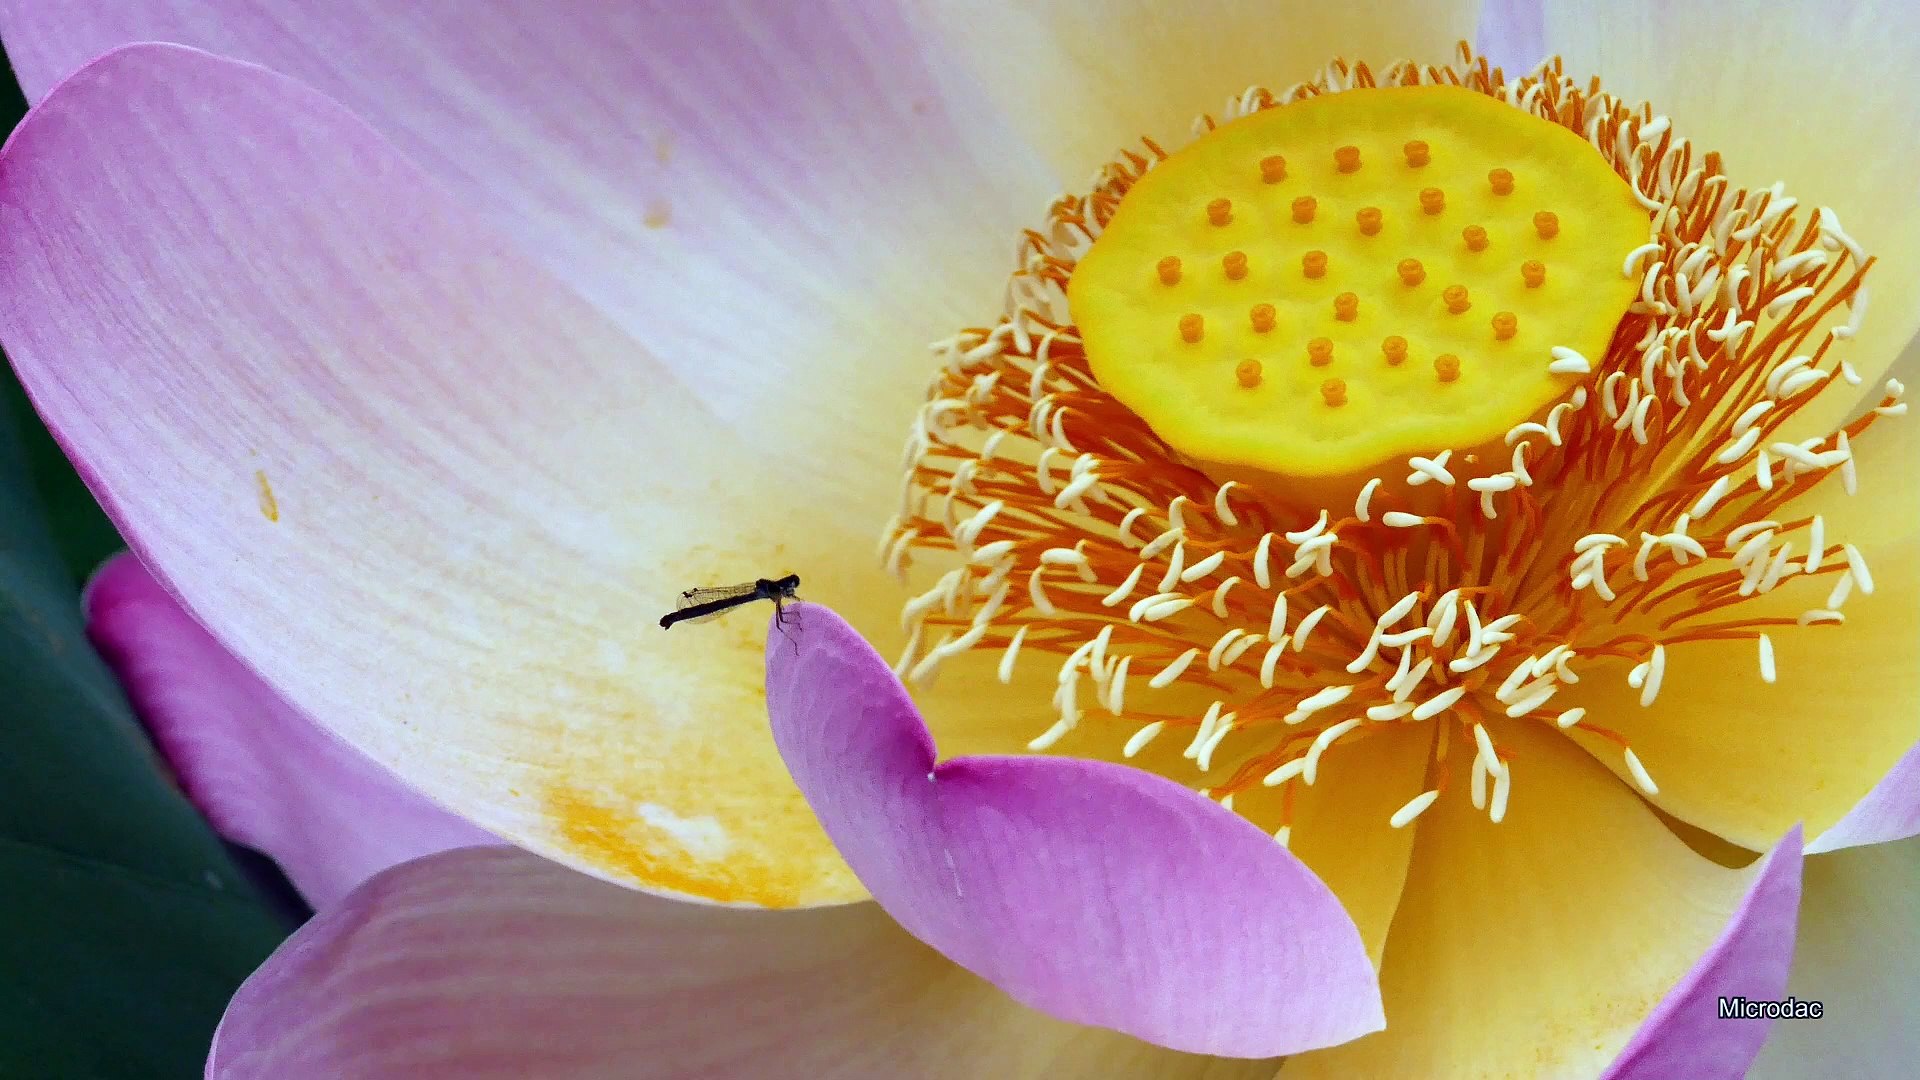 Dragonfly on a Lotus flower.